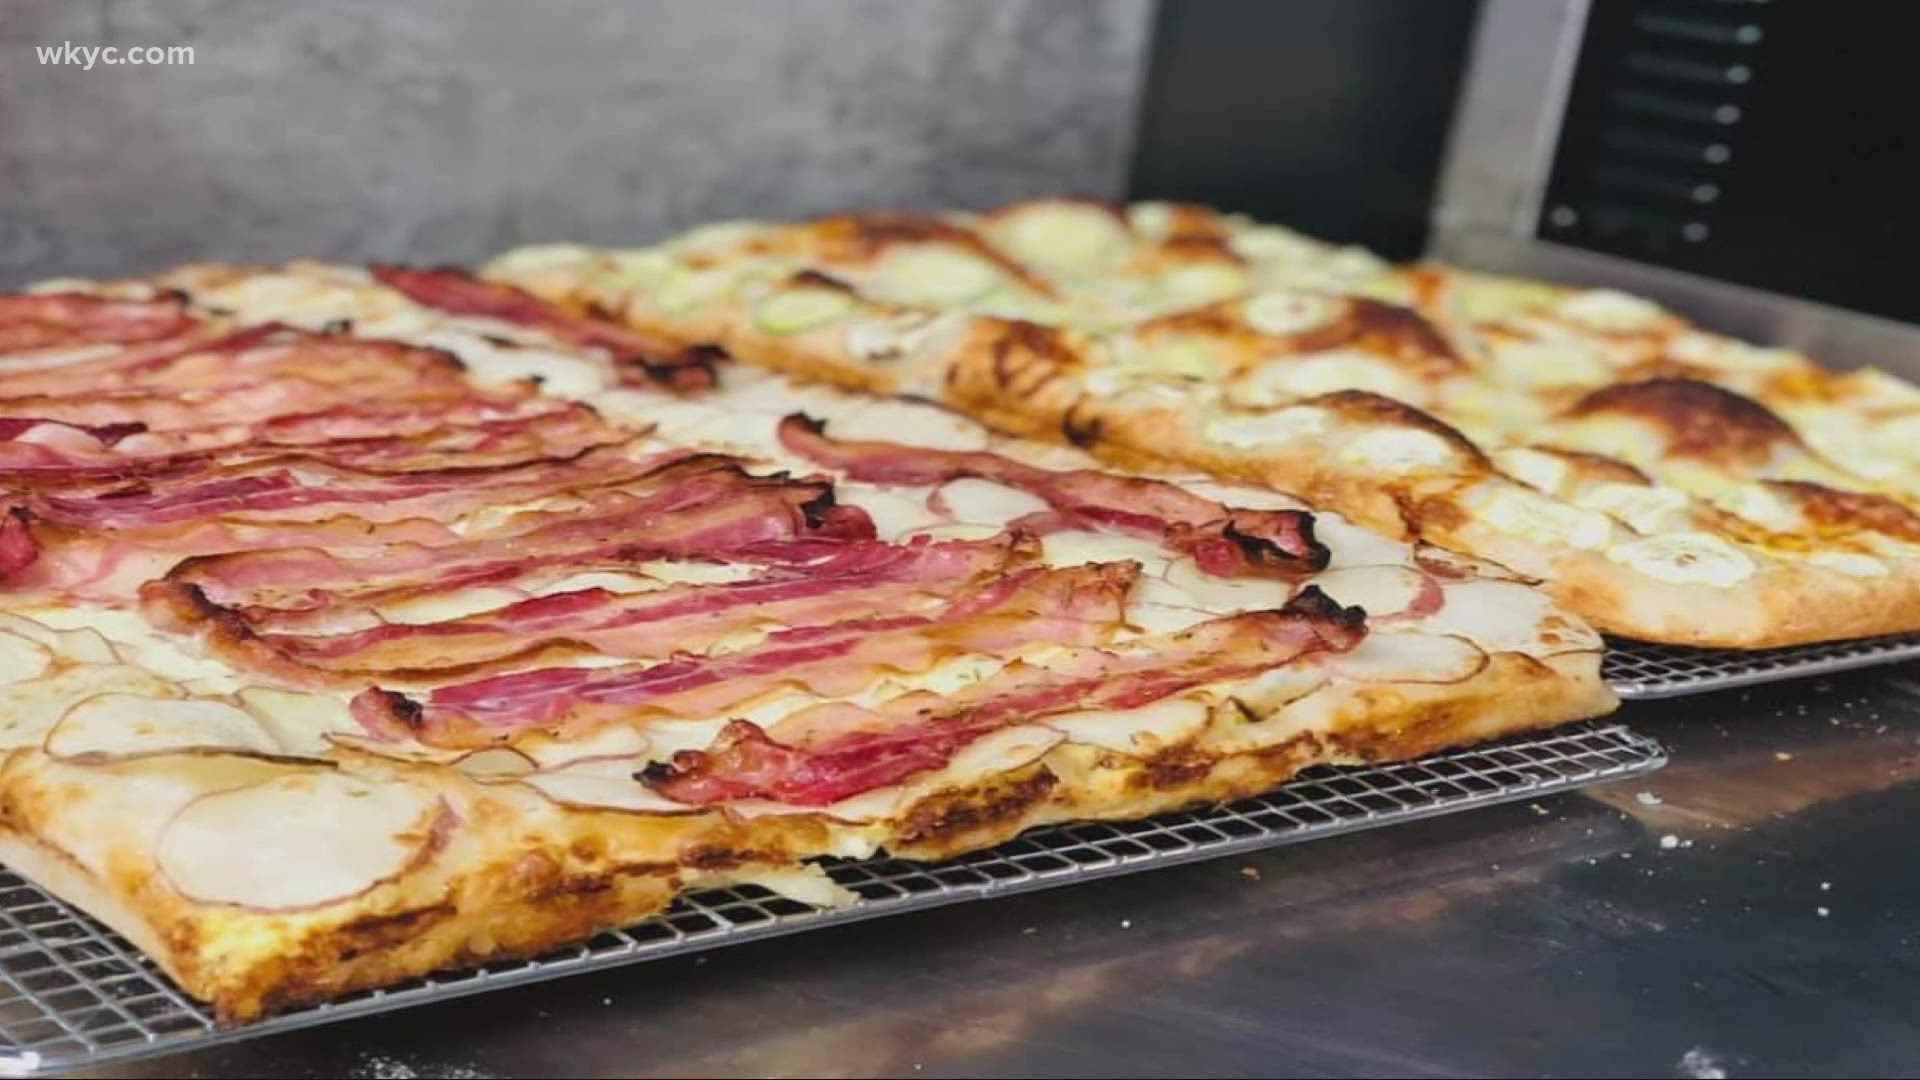 Citizen Pie opens downtown Cleveland location with Roman-style pizza |  